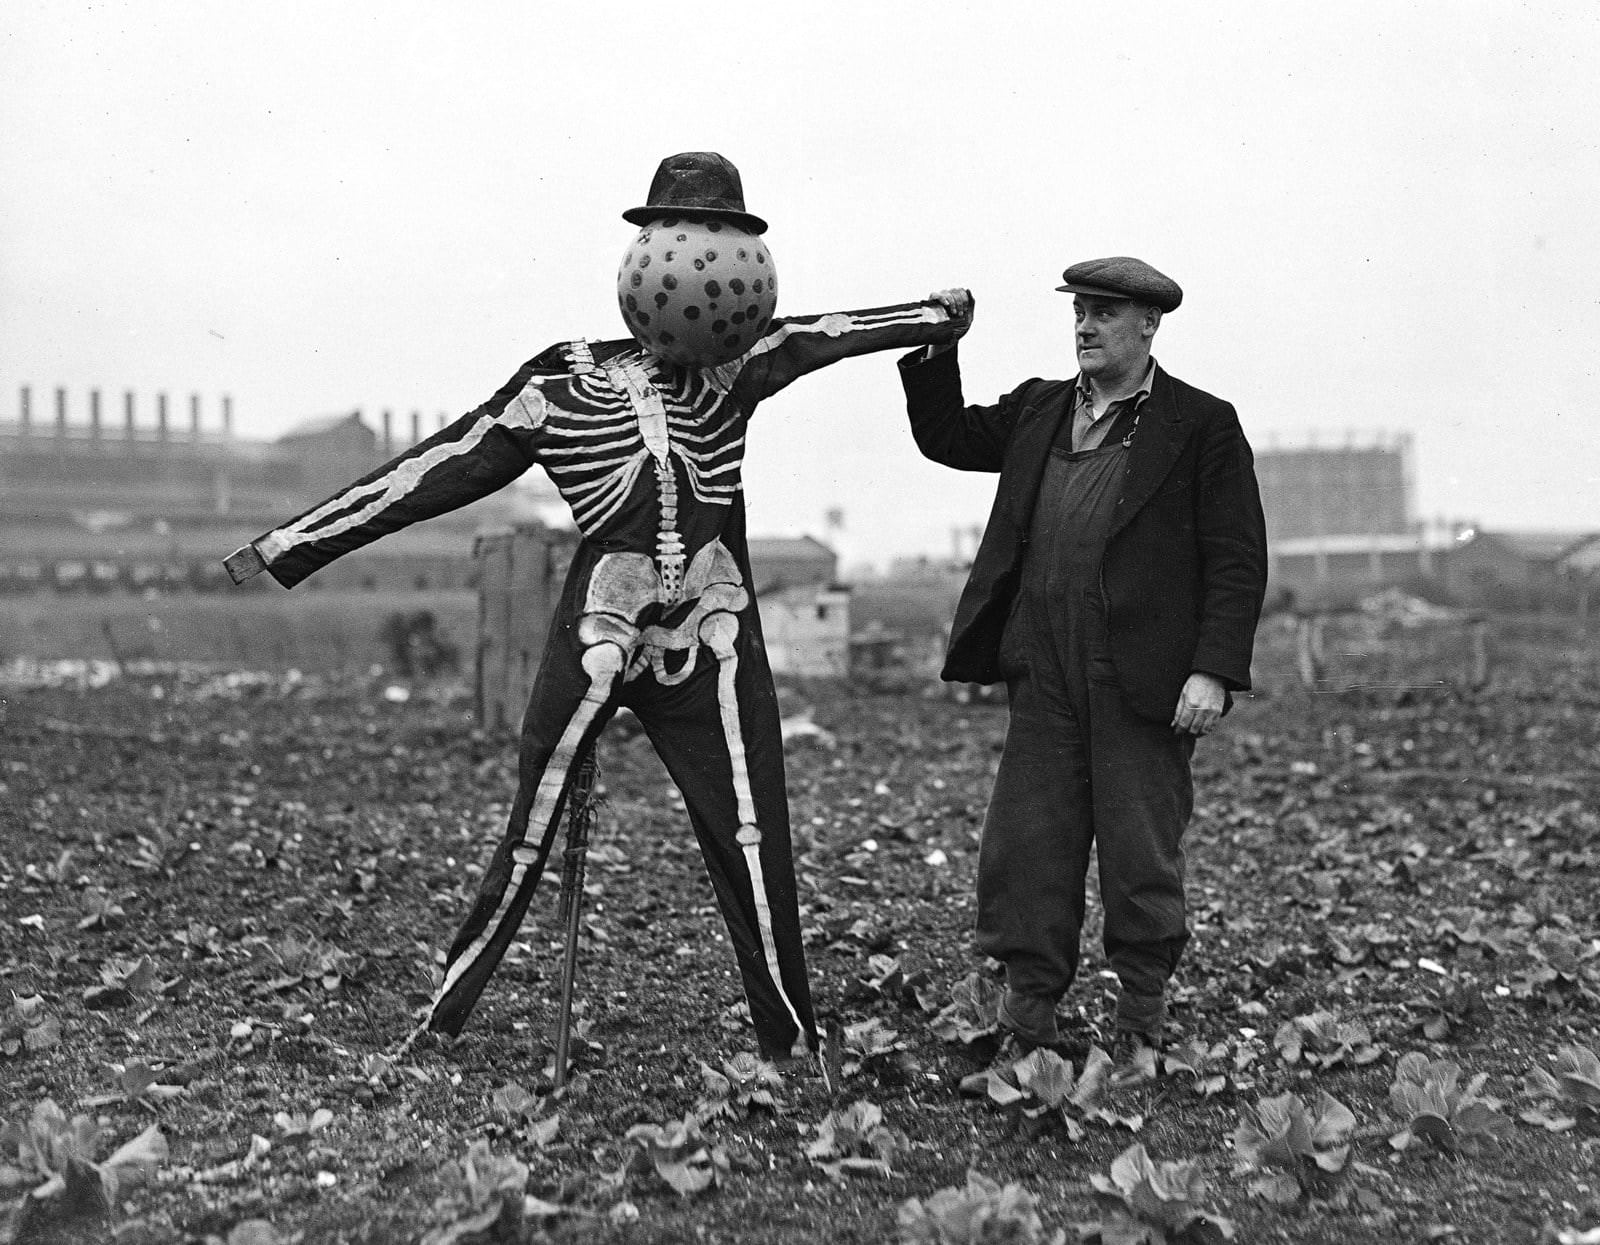 This farmer with the brilliant idea of dressing his scarecrow as a skeleton in 1937